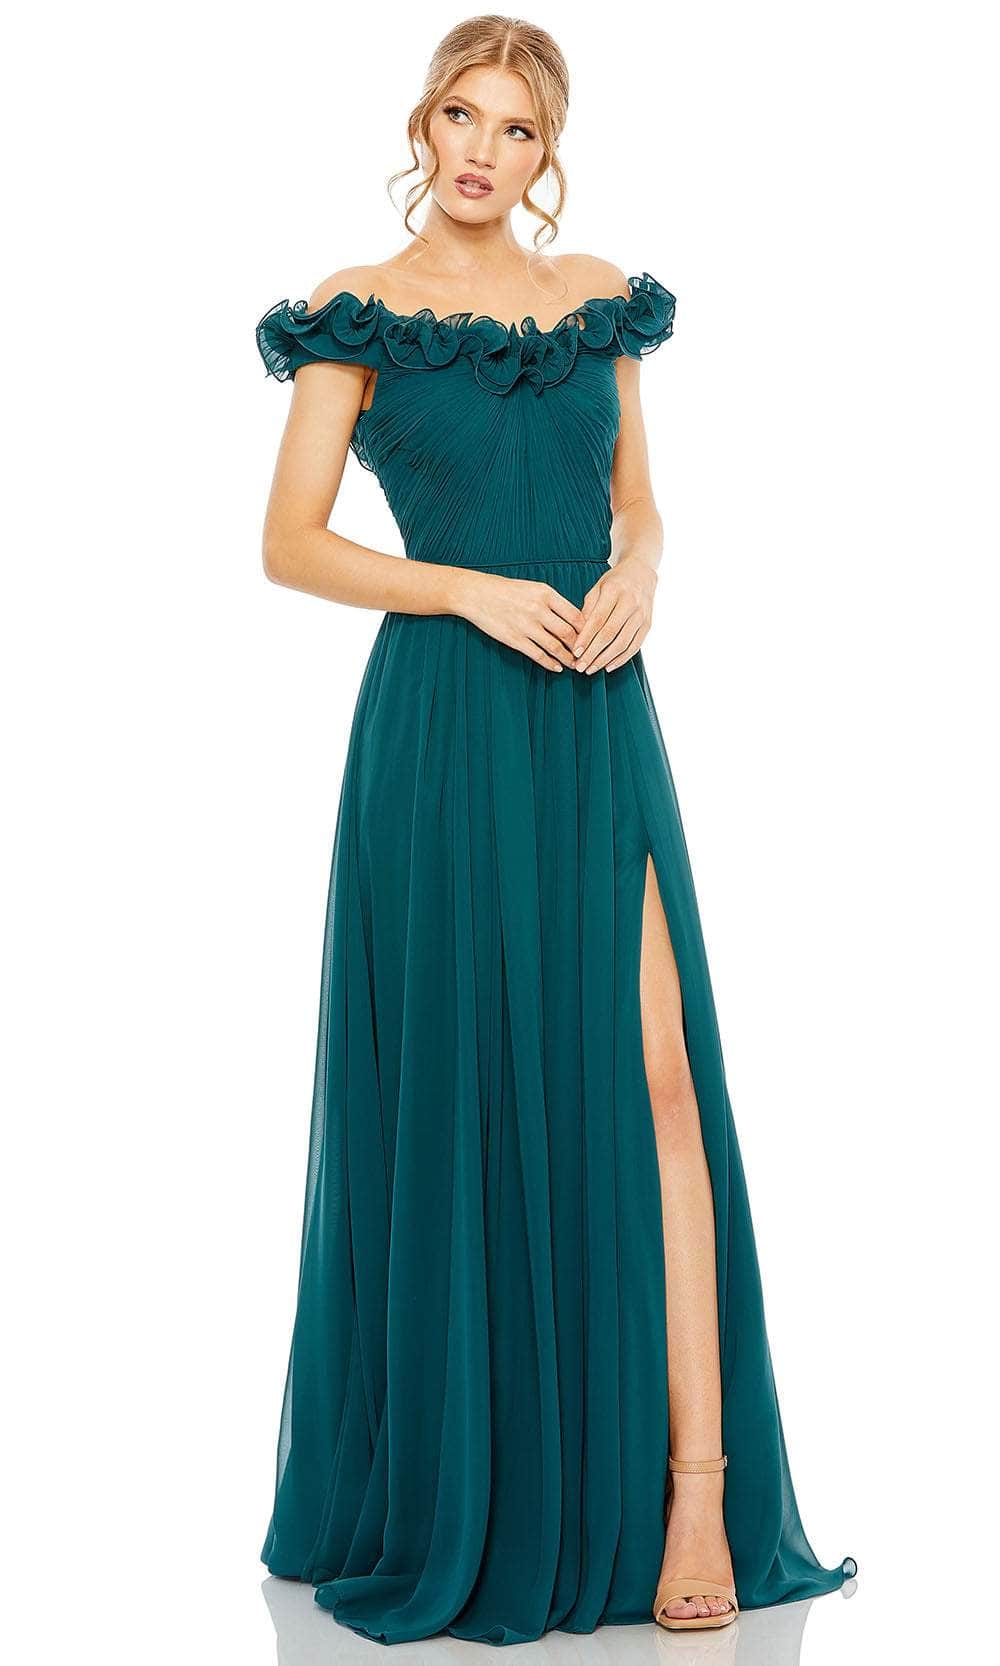 Ieena Duggal 11591 - Ruched A-Line Evening Gown Evening Dresses 2 / Teal